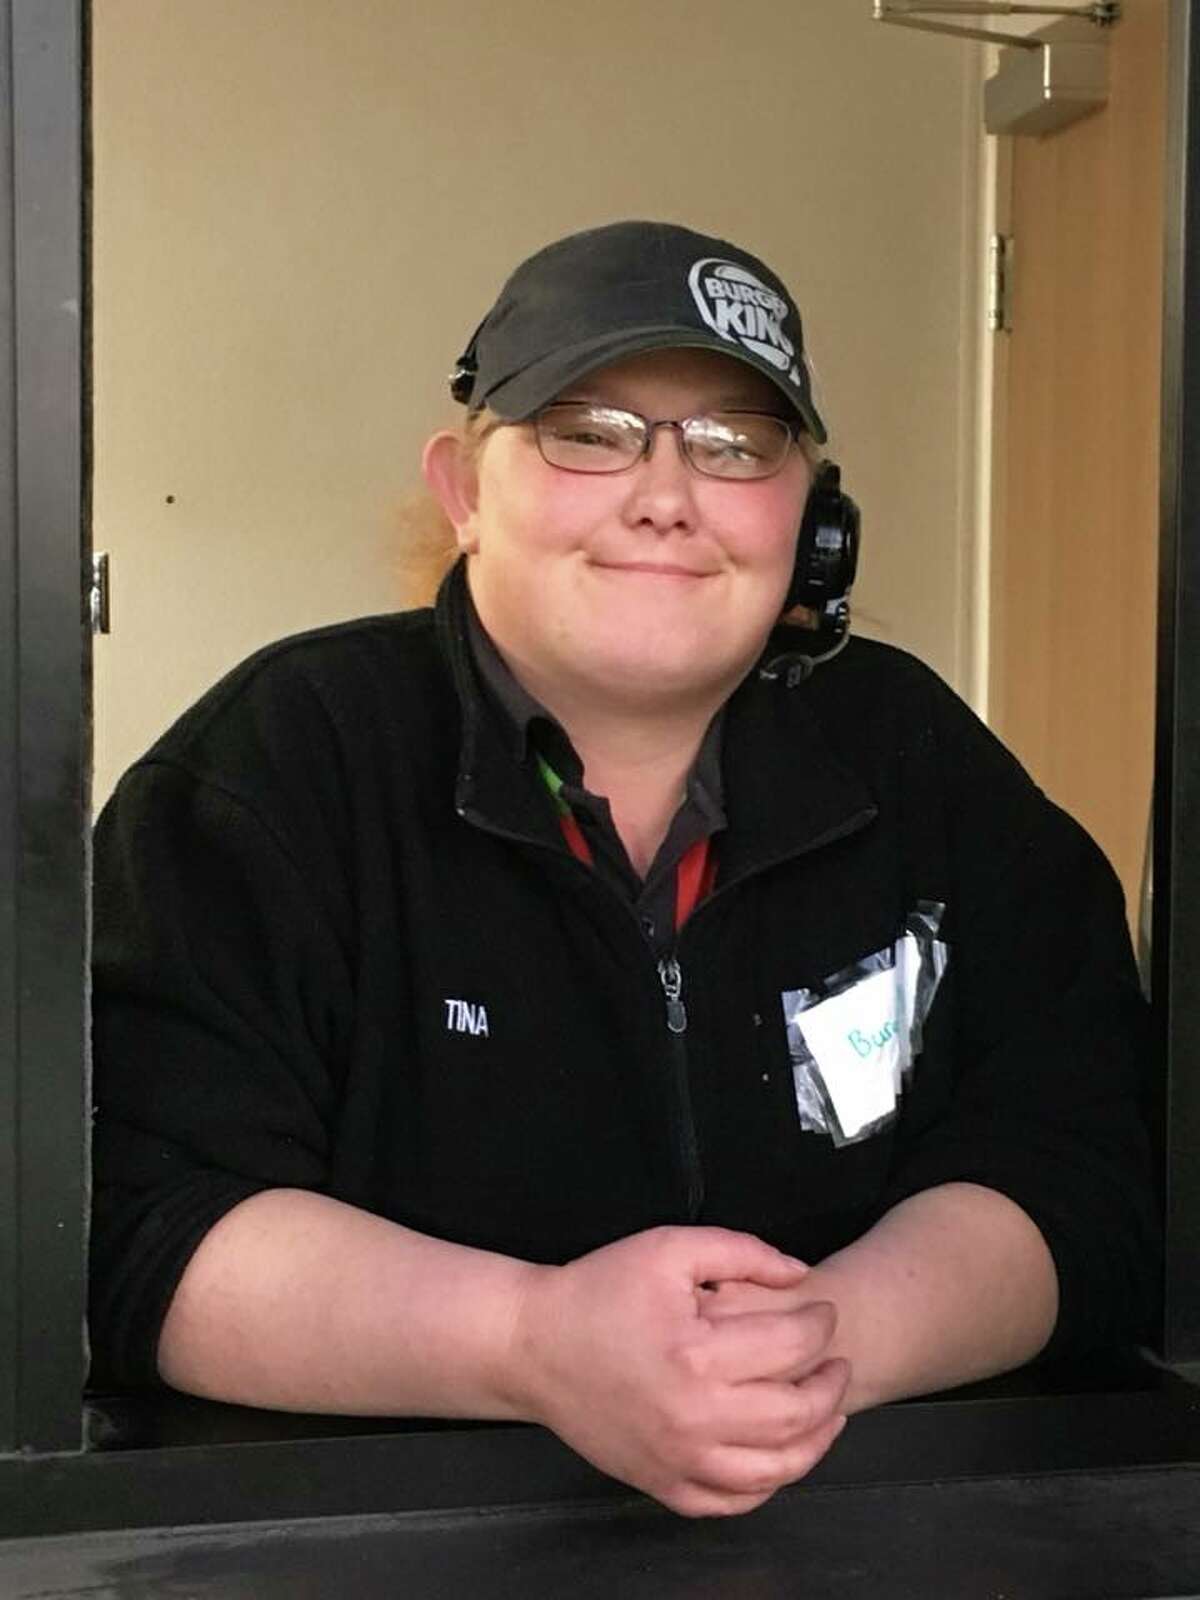 Burger King worker Tina Hardy became a hero Wednesday after helping a woman having a diabetic episode get some much needed sugar.